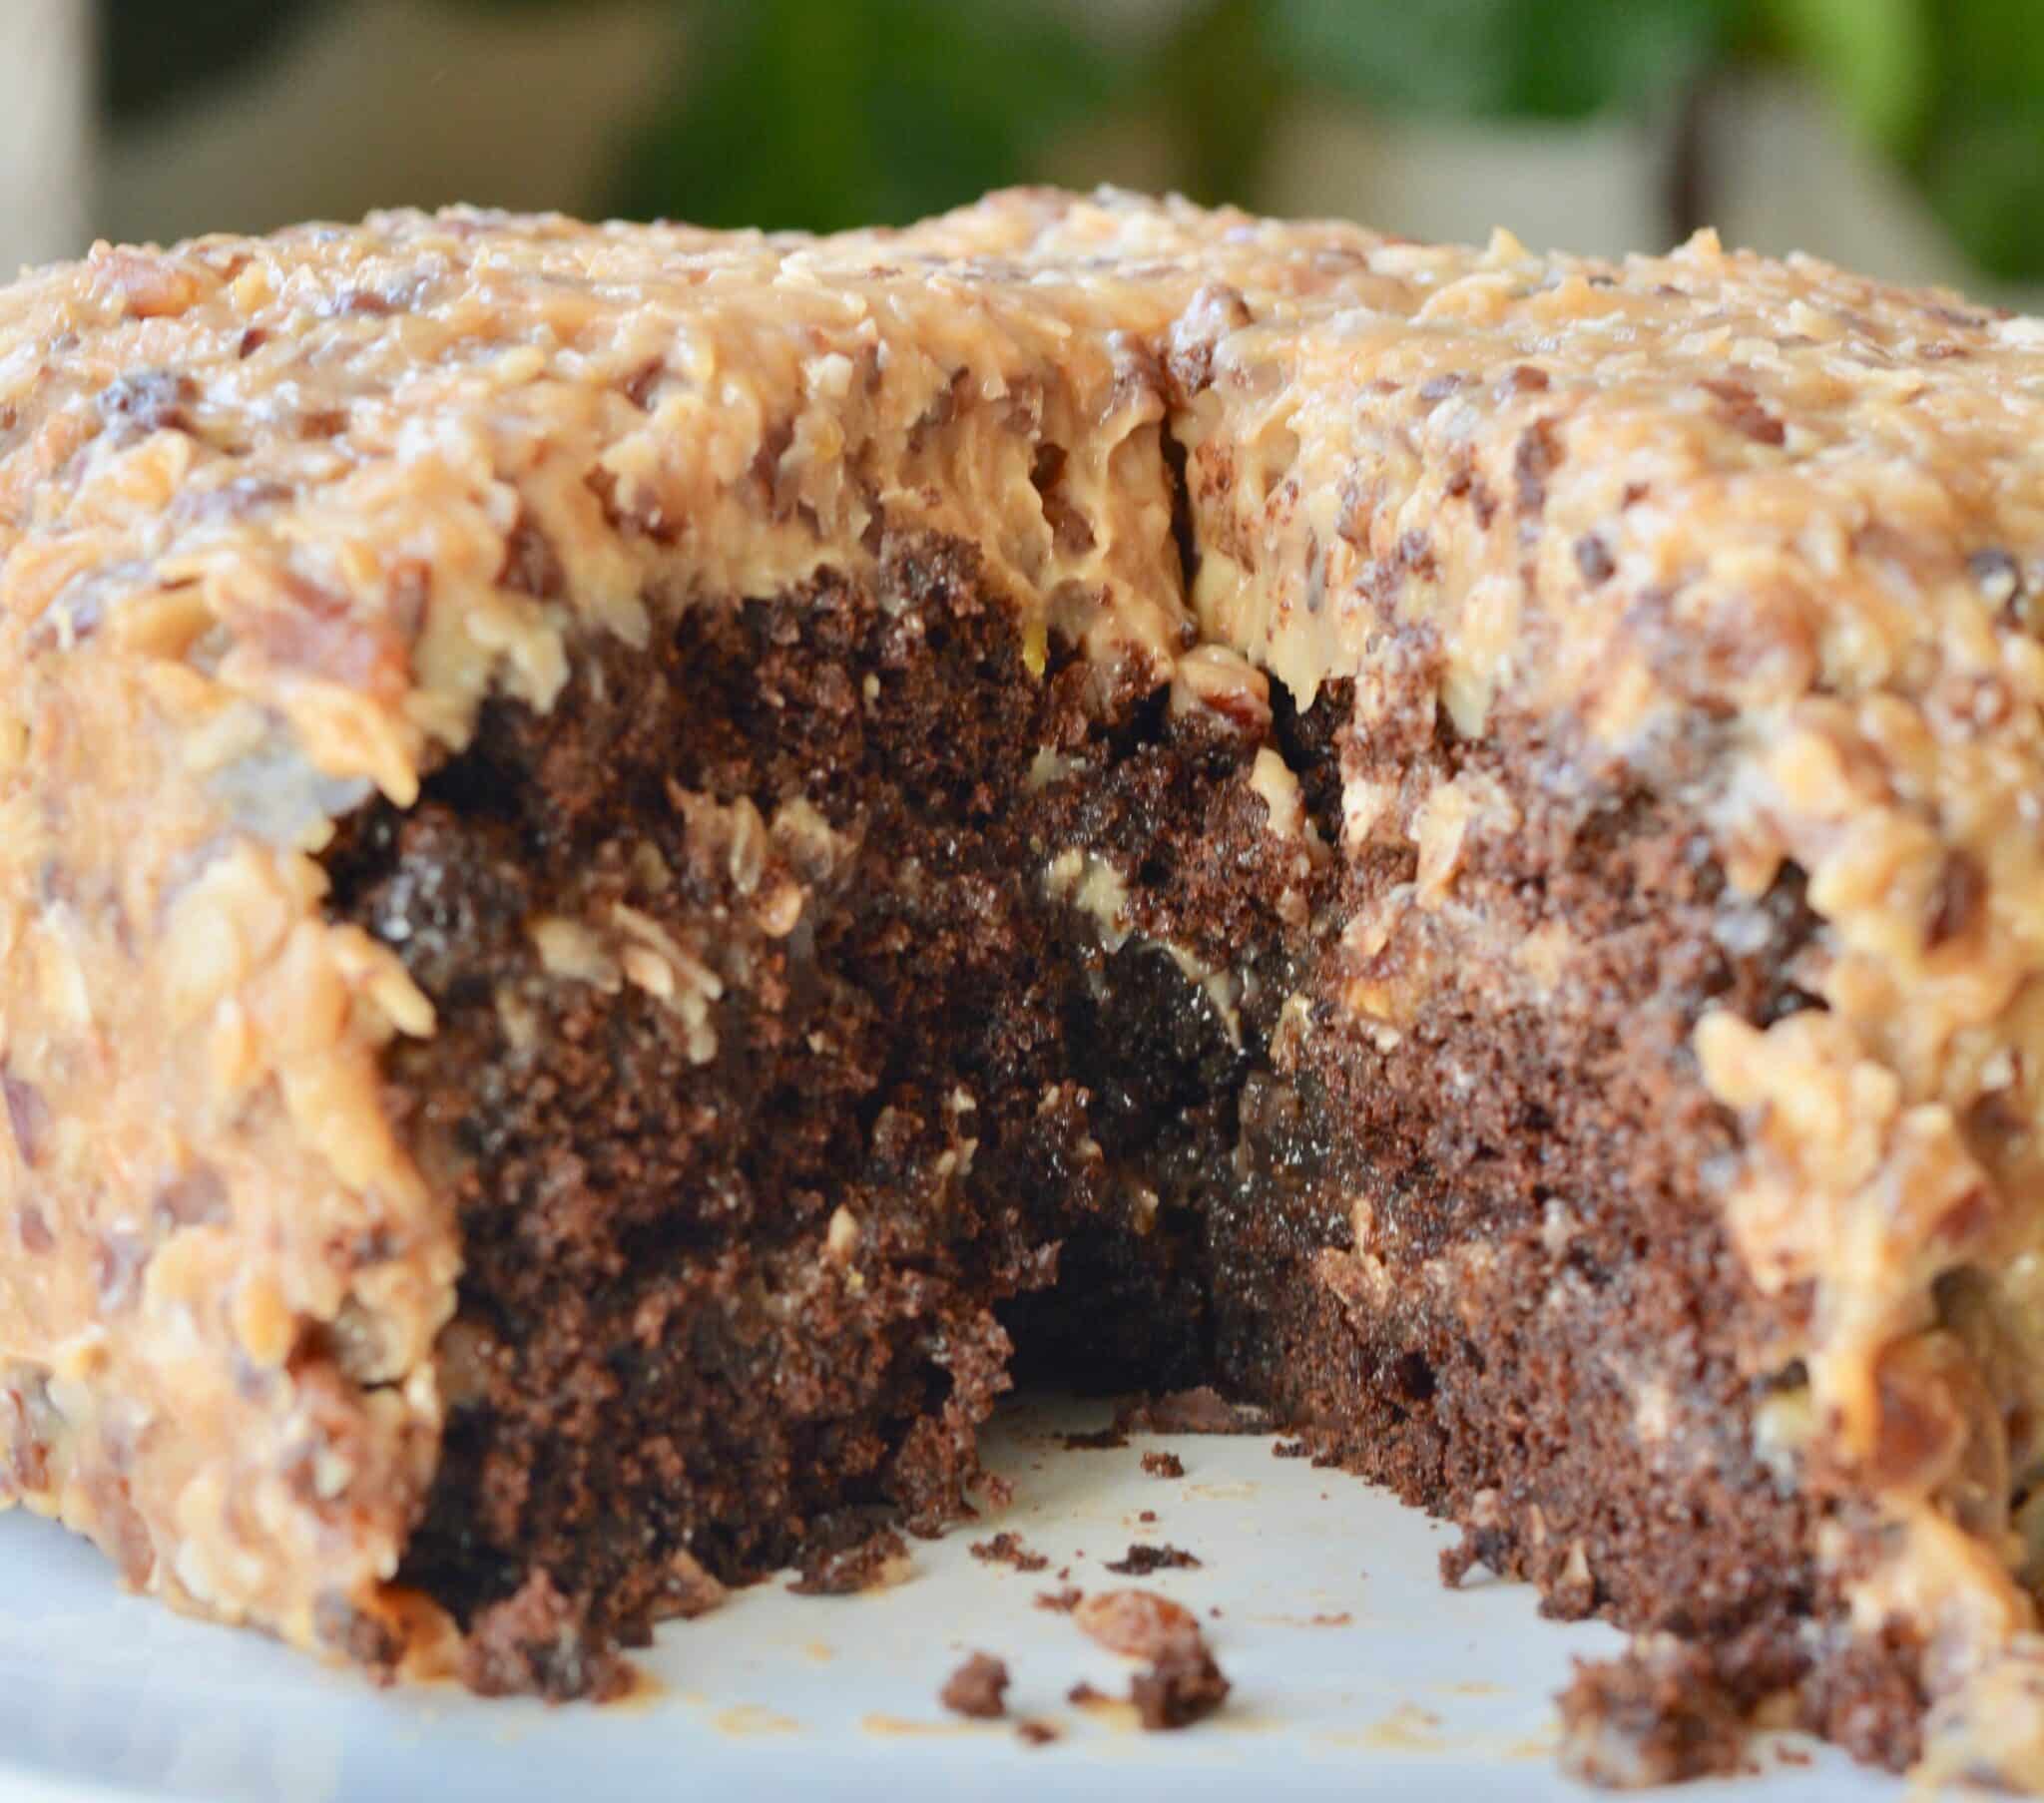 Perfectly dense German Chocolate Cake. Made with chocolate chips, plenty of coconut and pecans. Perfect for a birthday or any celebration!